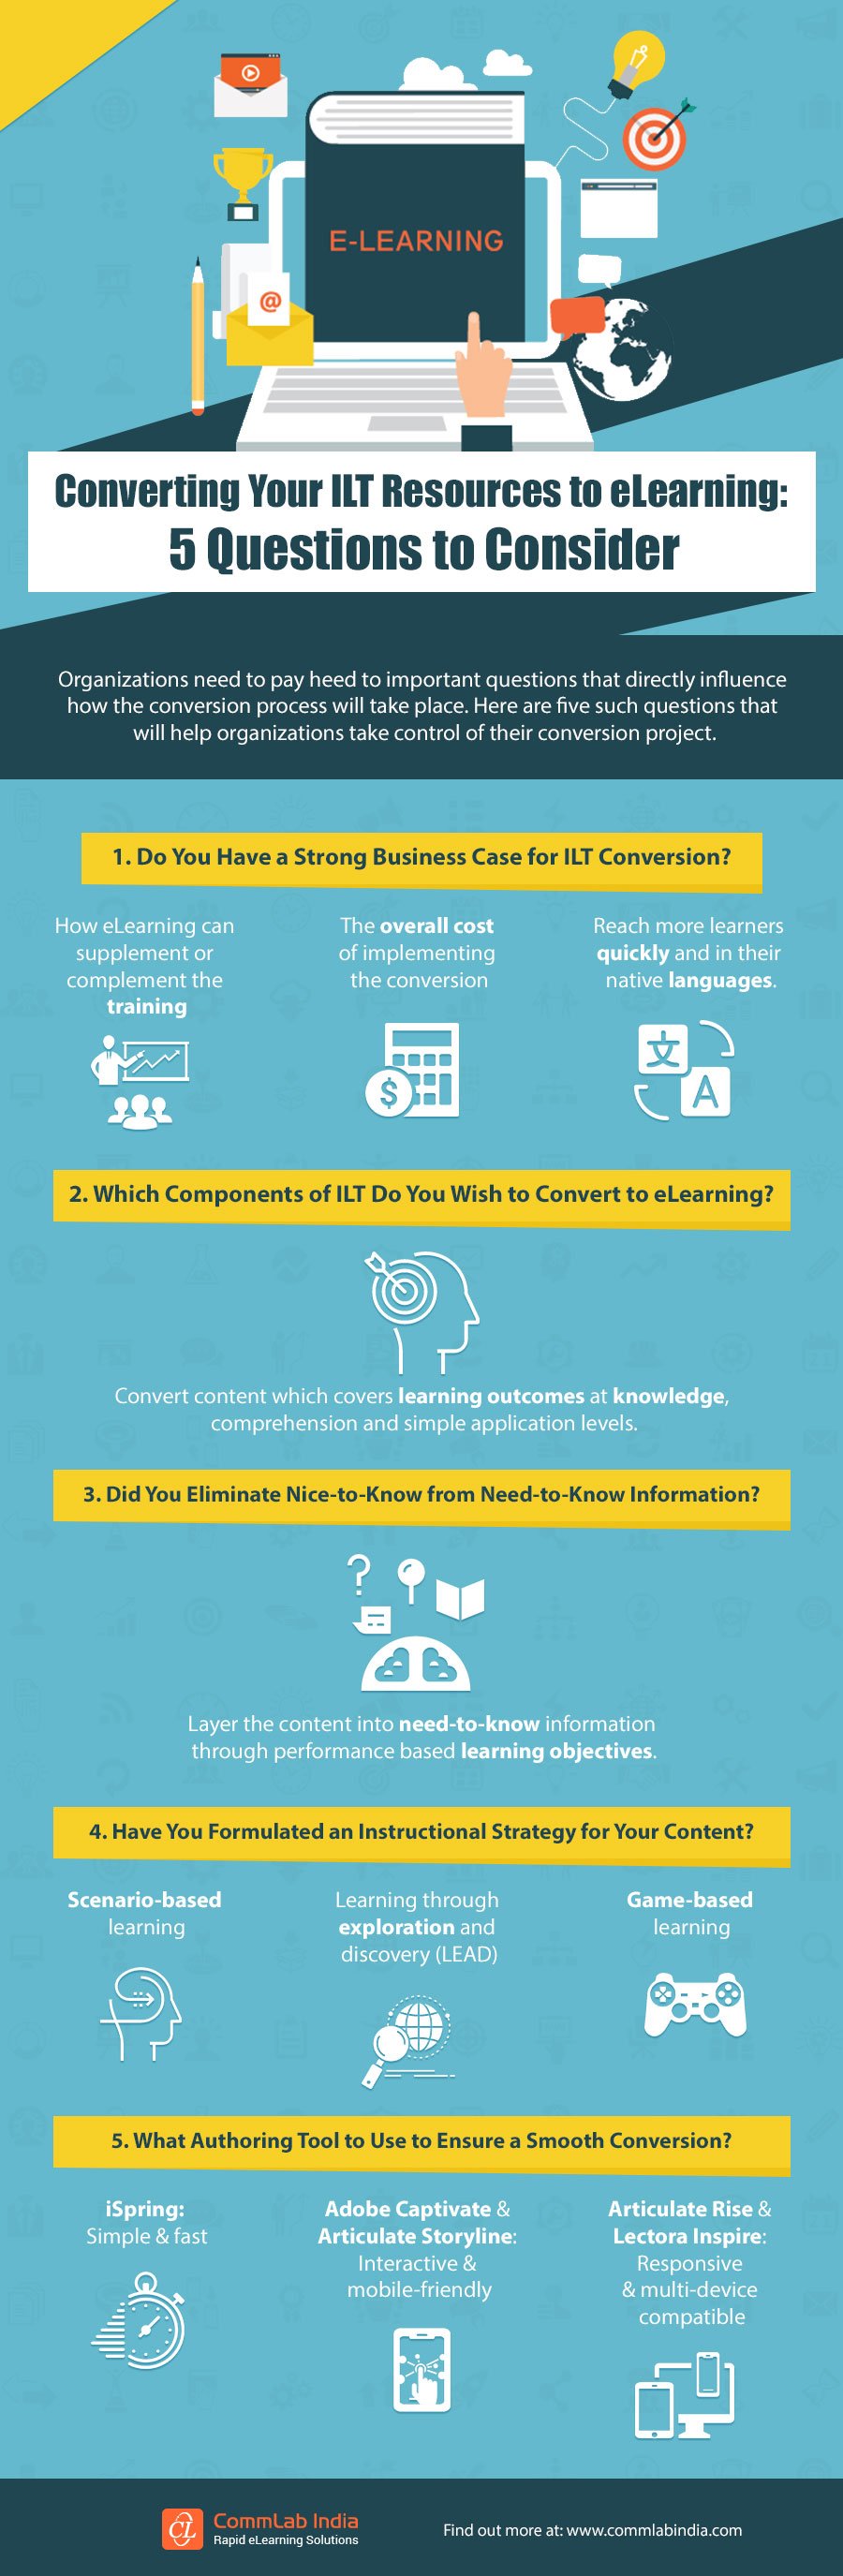 Converting Your ILT Resources to eLearning: 5 Questions to Consider [Infographic]